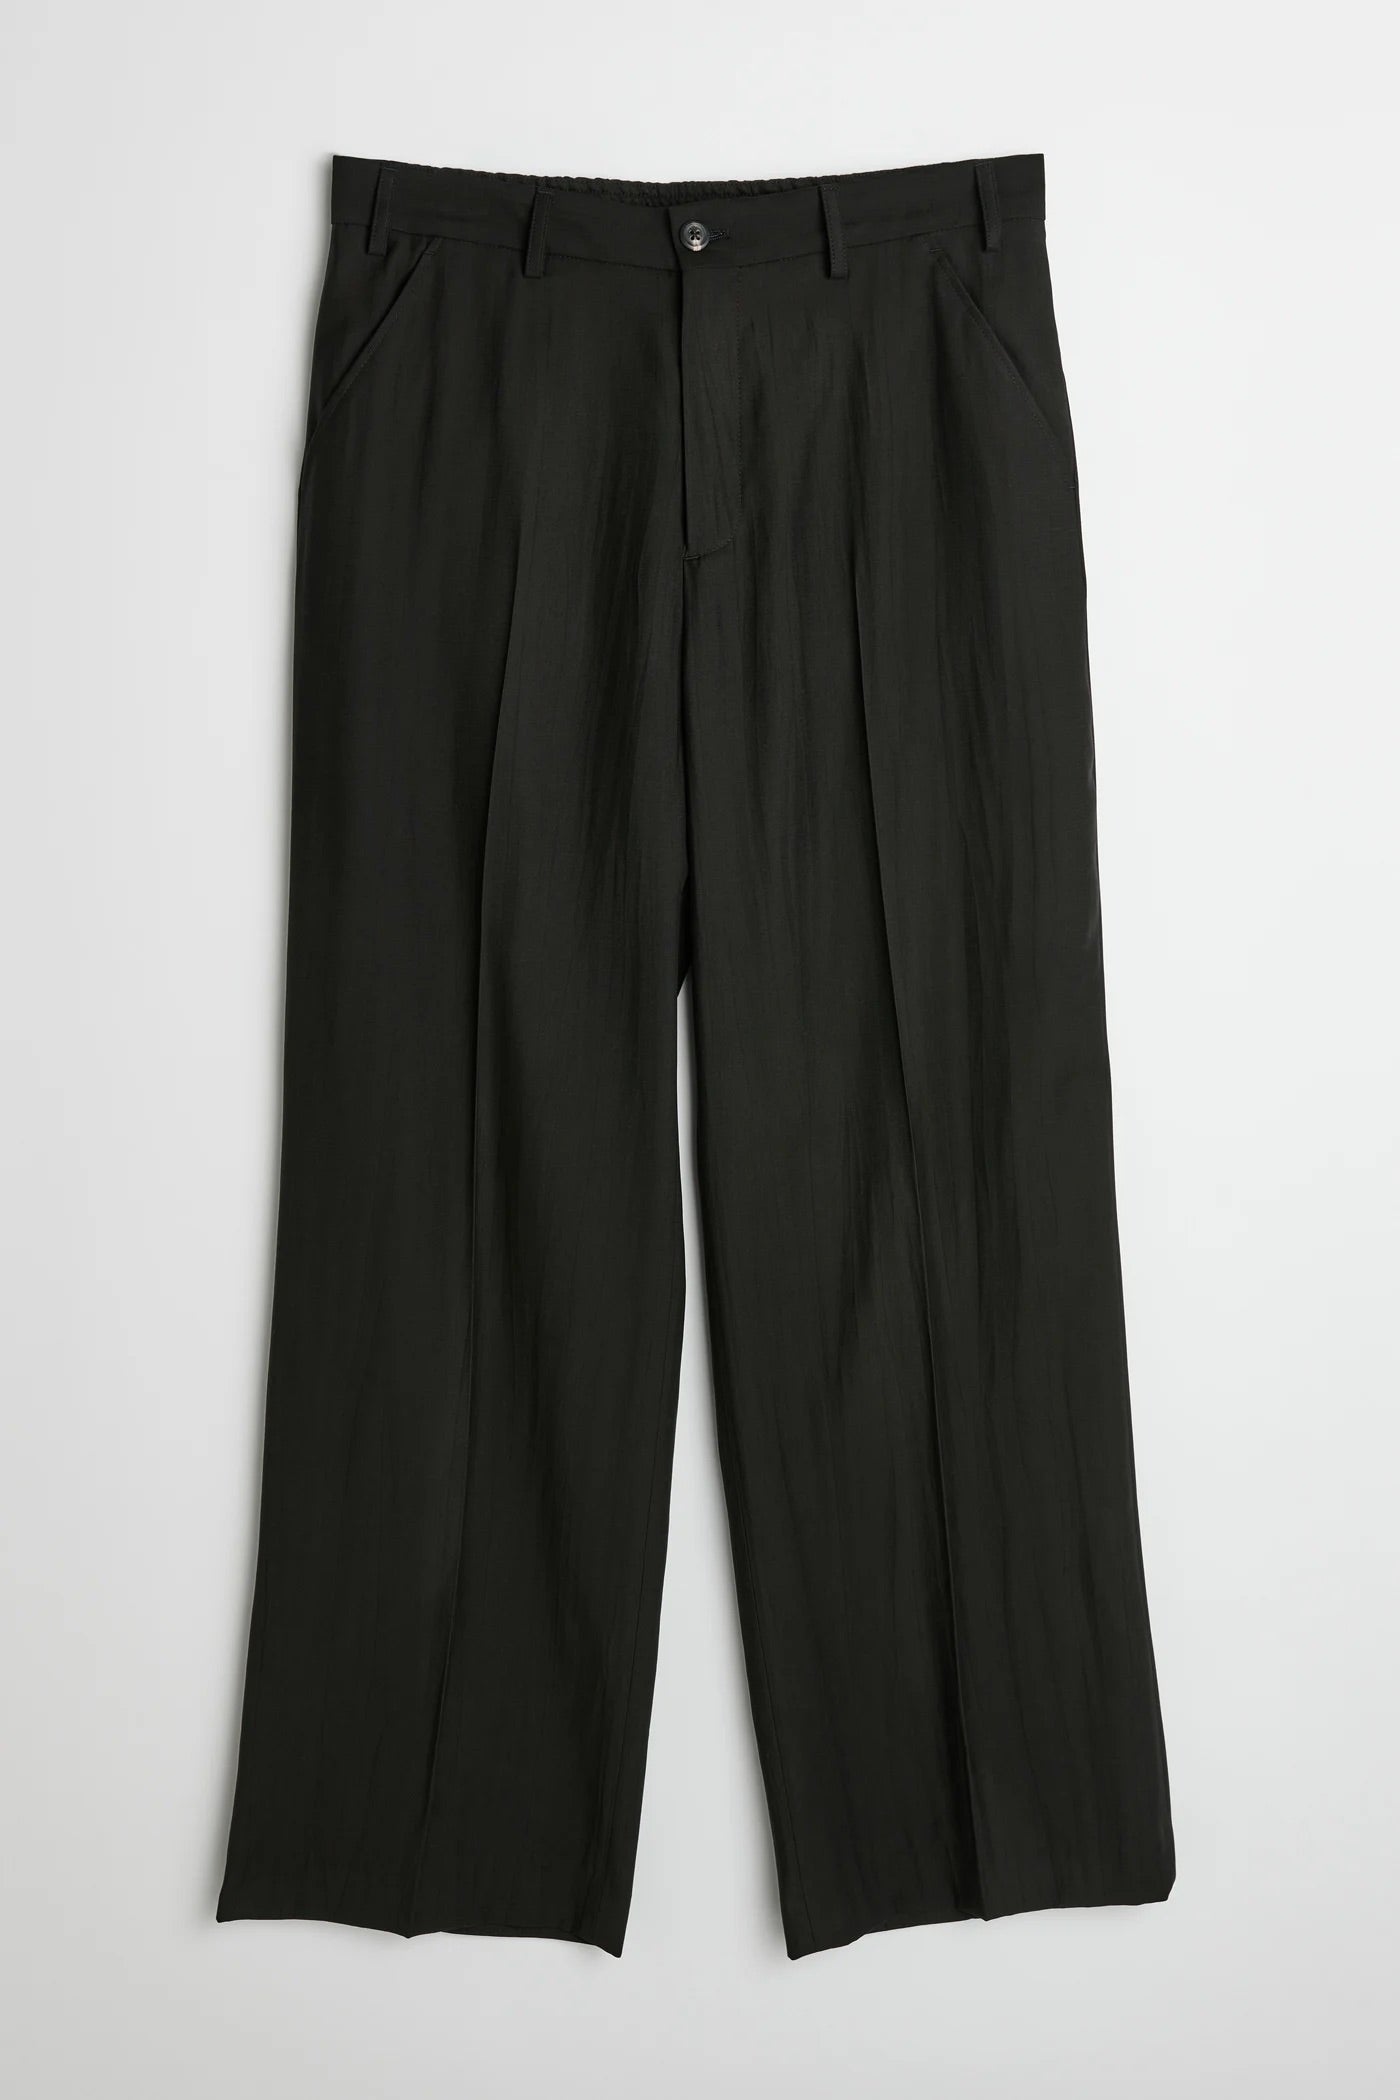 OUR LEGACY 「SAILOR TROUSER BLACK EXPERIENCED VISCOSE」